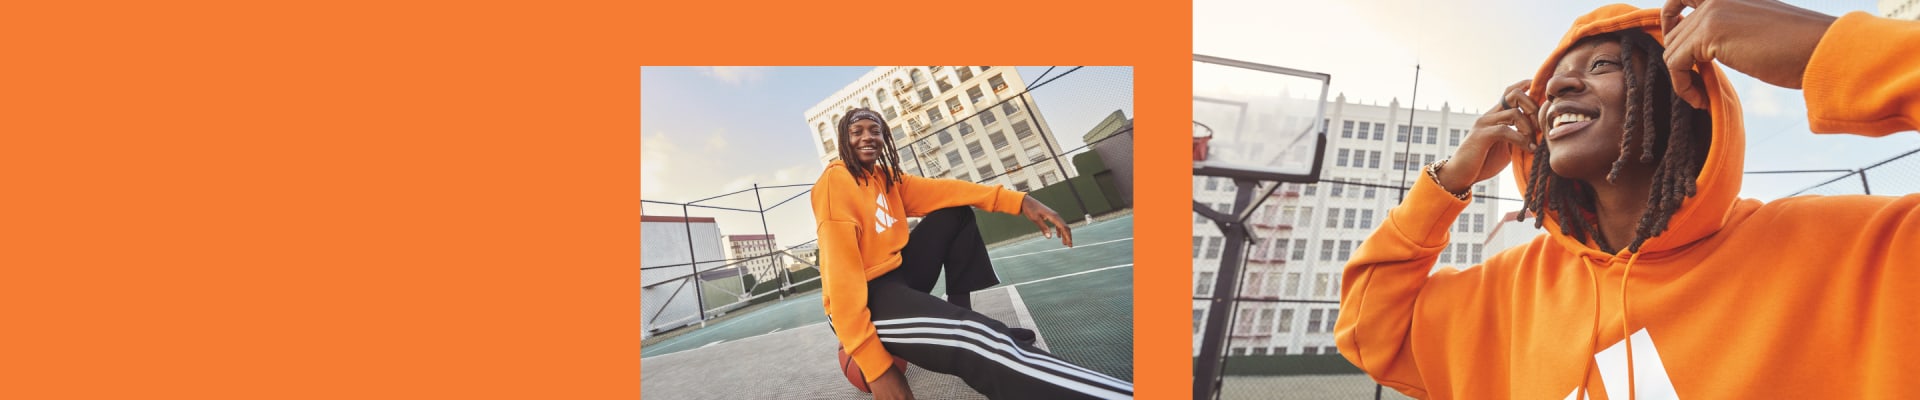 A woman sits on a basketball court, her back to the camera. She wears a orange adidas hoody and black adidas bottoms.